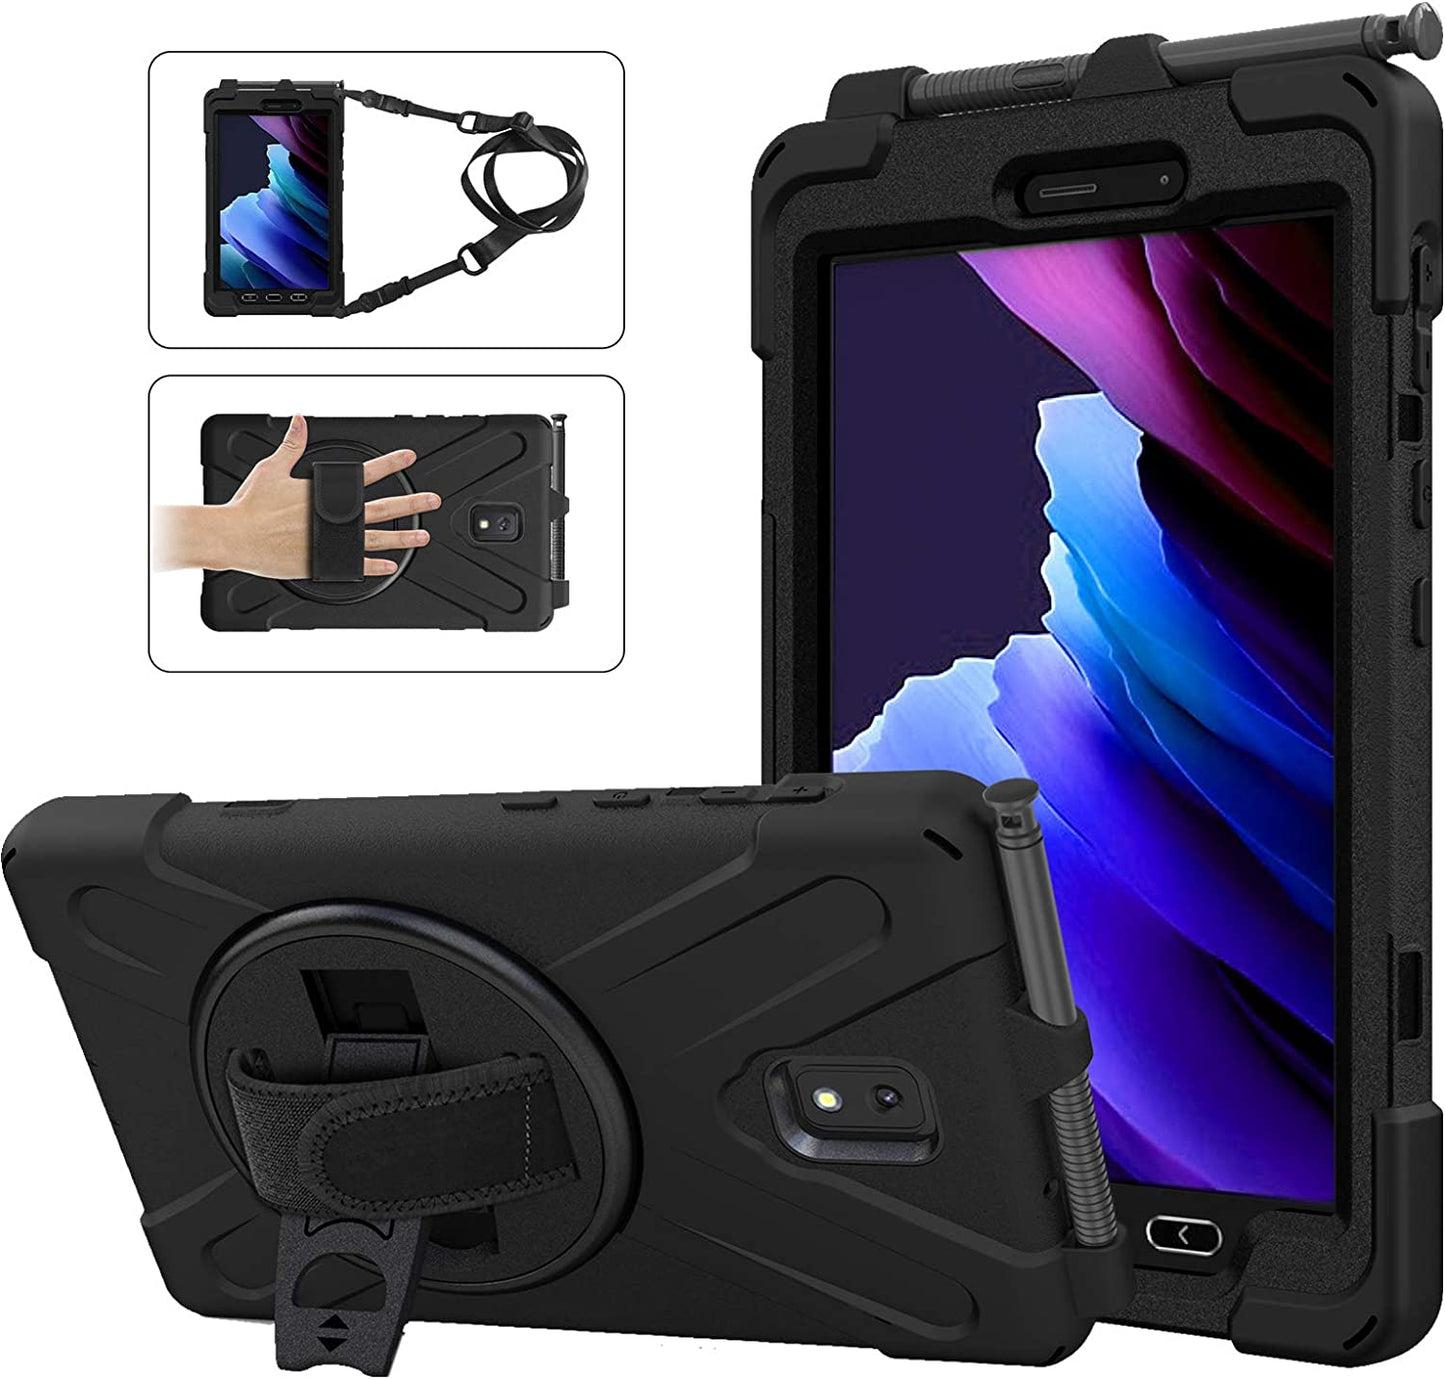 Yapears Samsung Galaxy Tab Active 3 8.0 Case, Heavy Duty Rugged Shockproof Drop Protection Case with 360 Stand, Handle Hand Strap & Shoulder Strap for Galaxy Tab Active3 8" 2020 T570/T575/T577 (Blue)